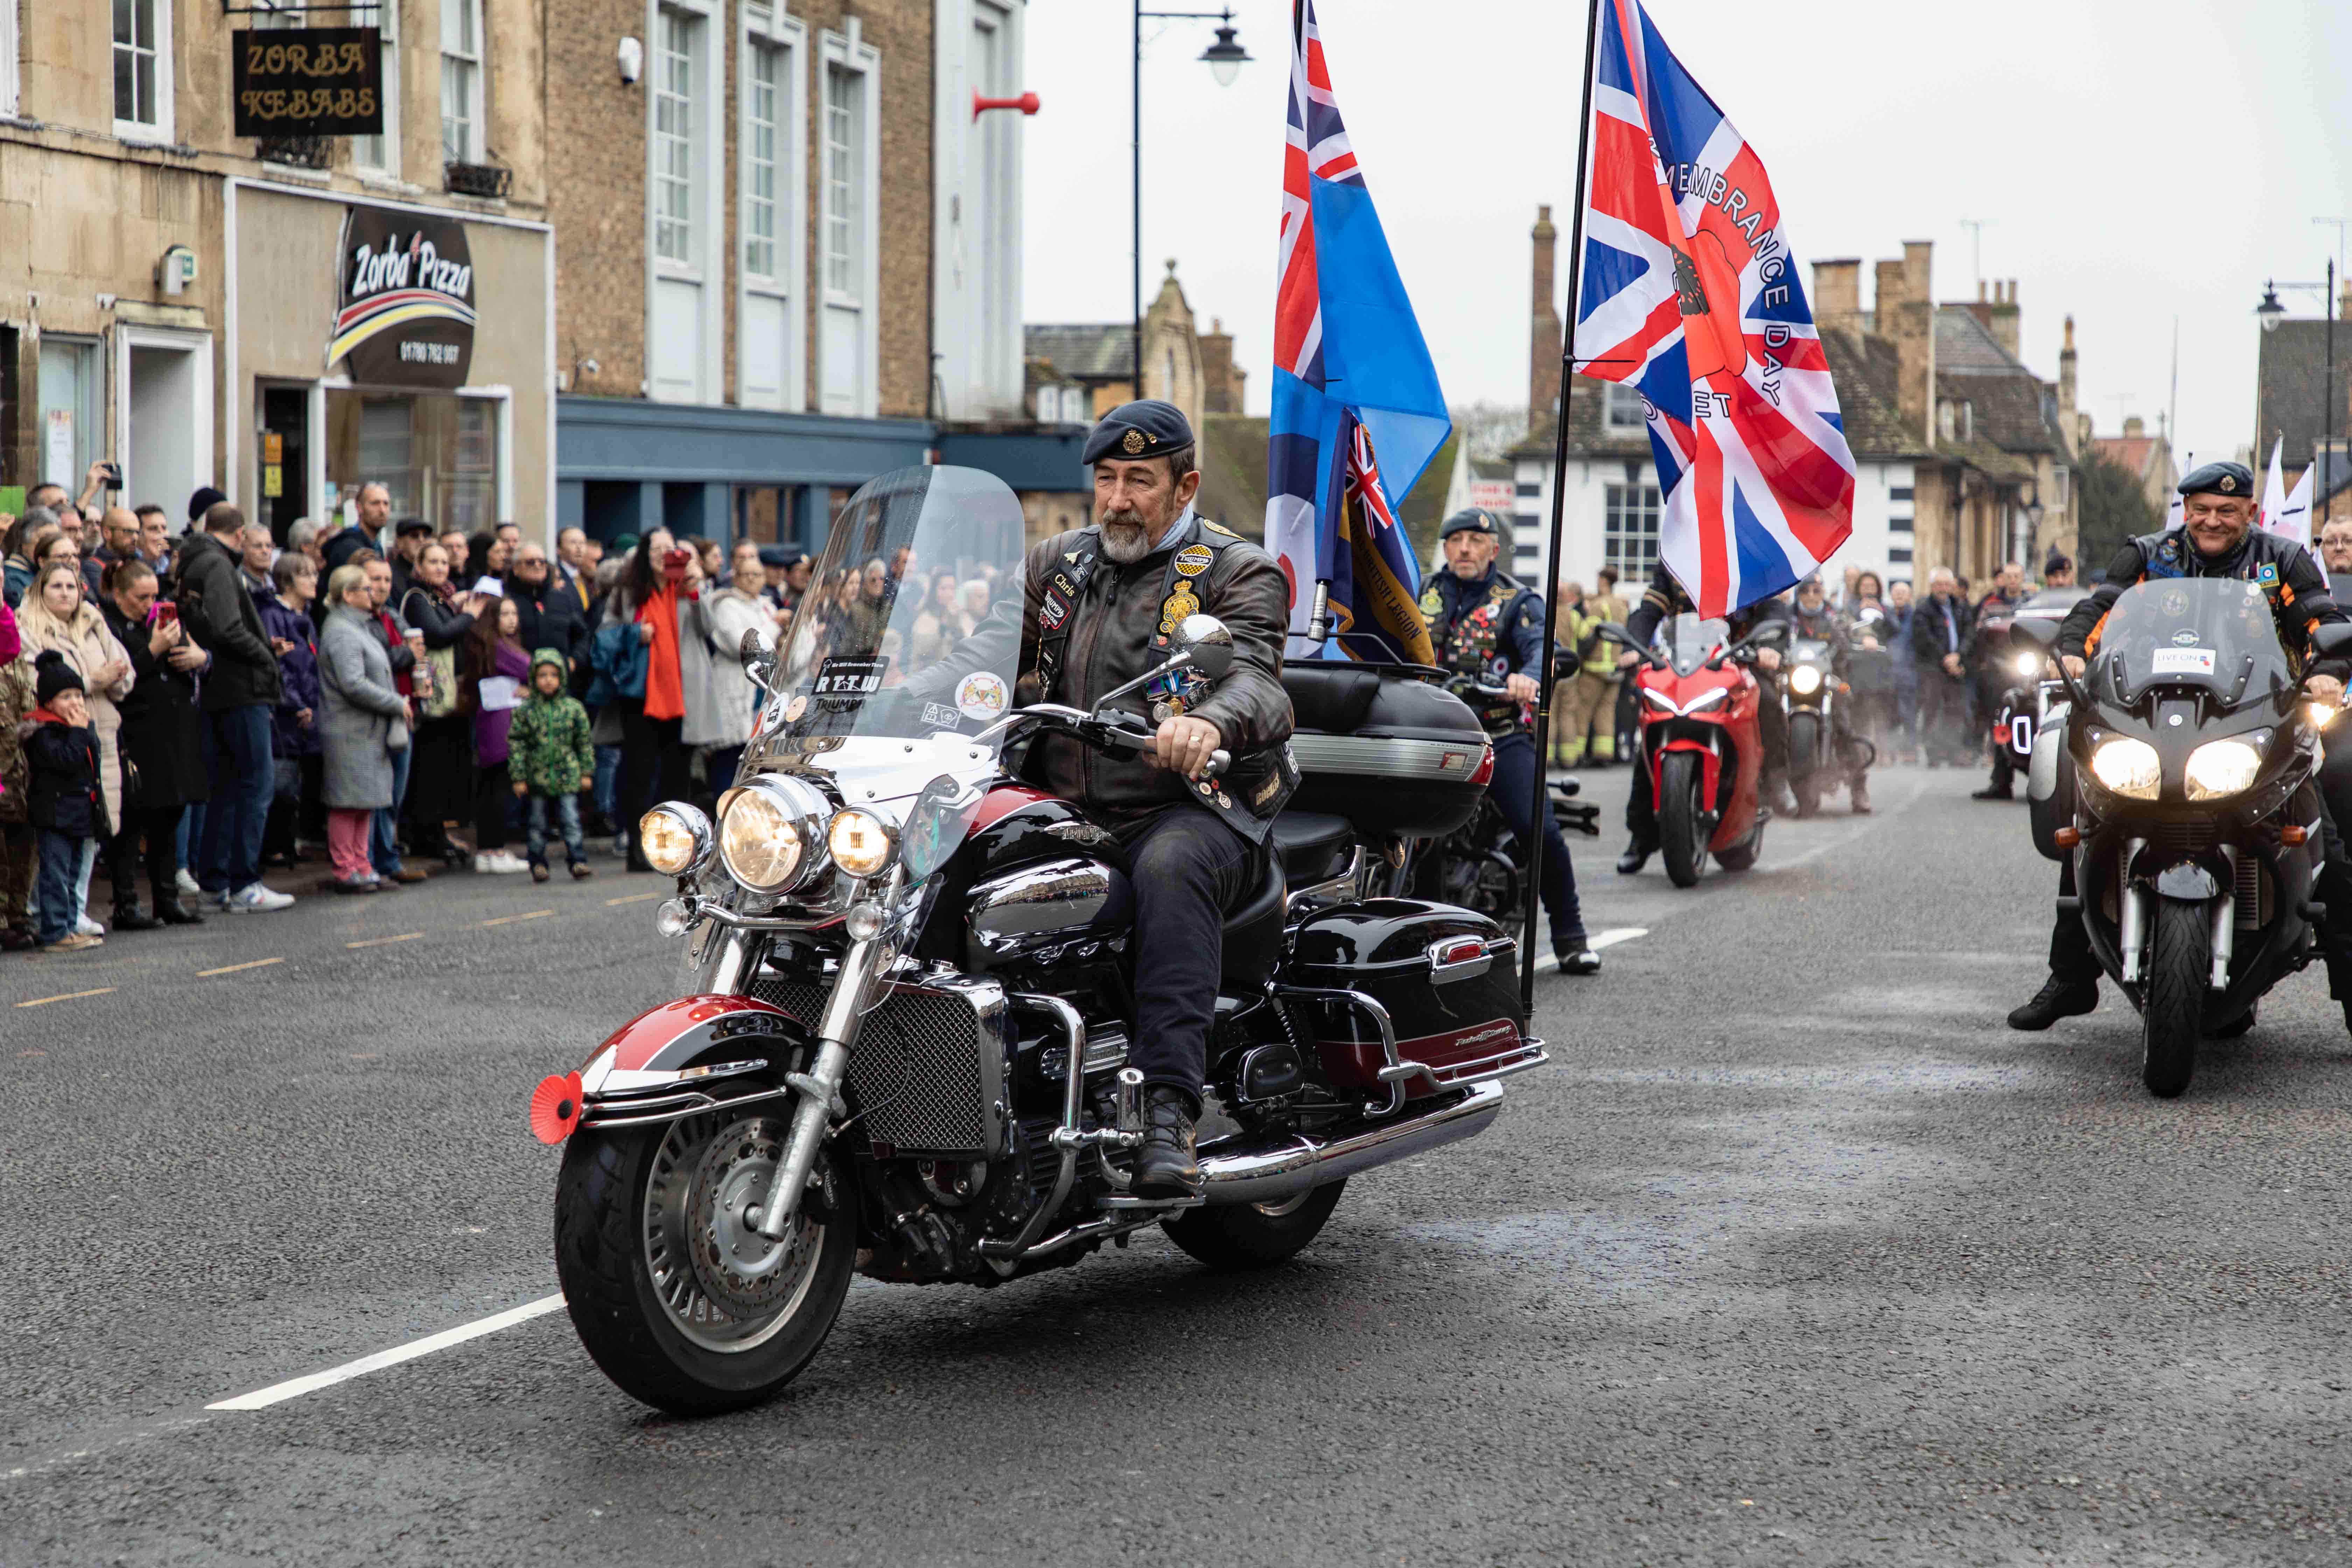 Veteran motorcyclists ride through Broad Street in Stamford on Remembrance Sunday